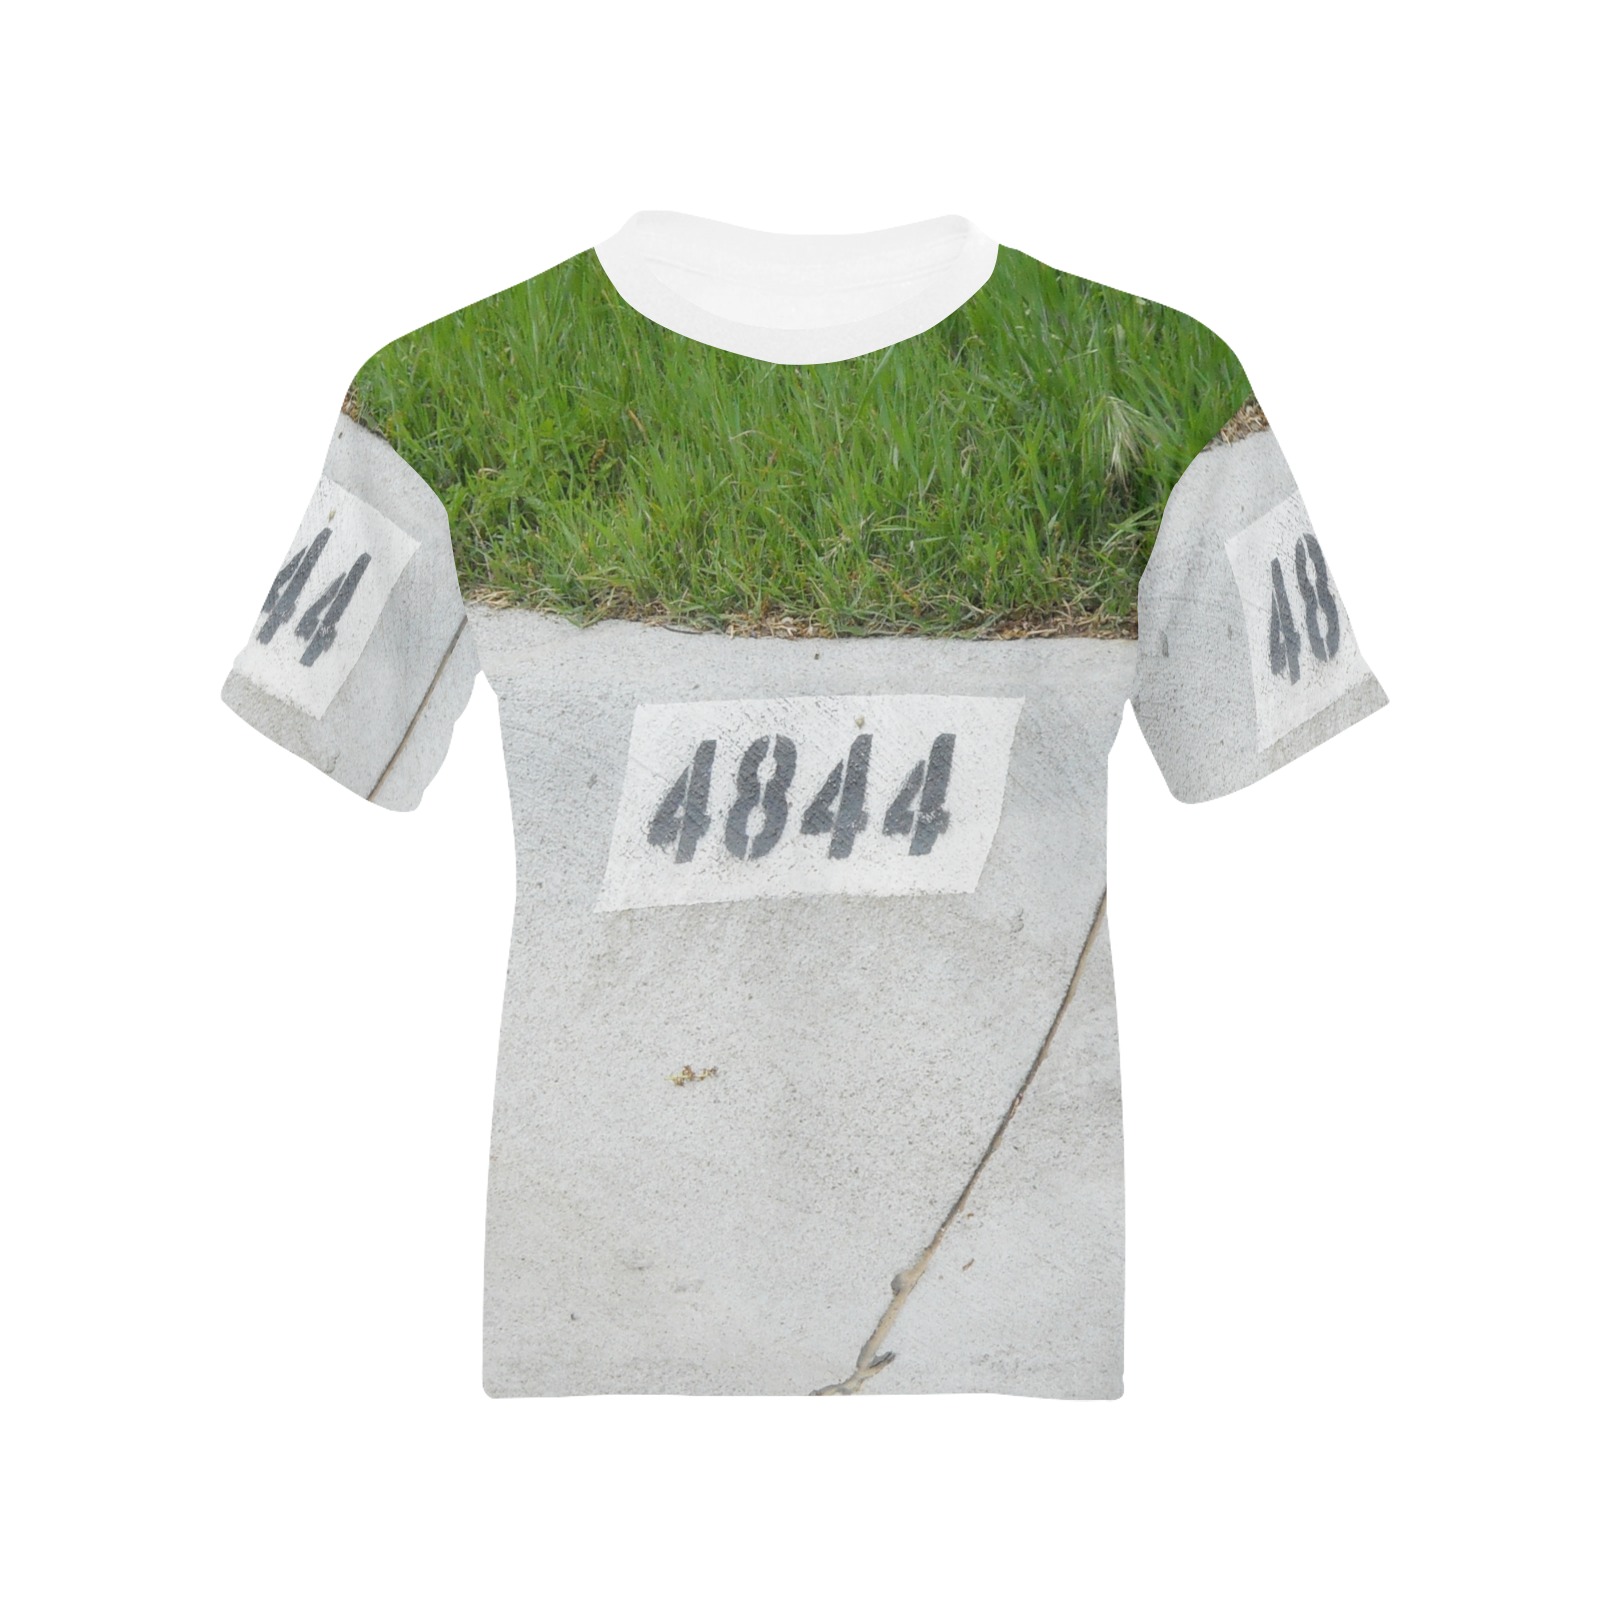 Street Number 4844 with white collar Kids' All Over Print T-shirt (Model T65)